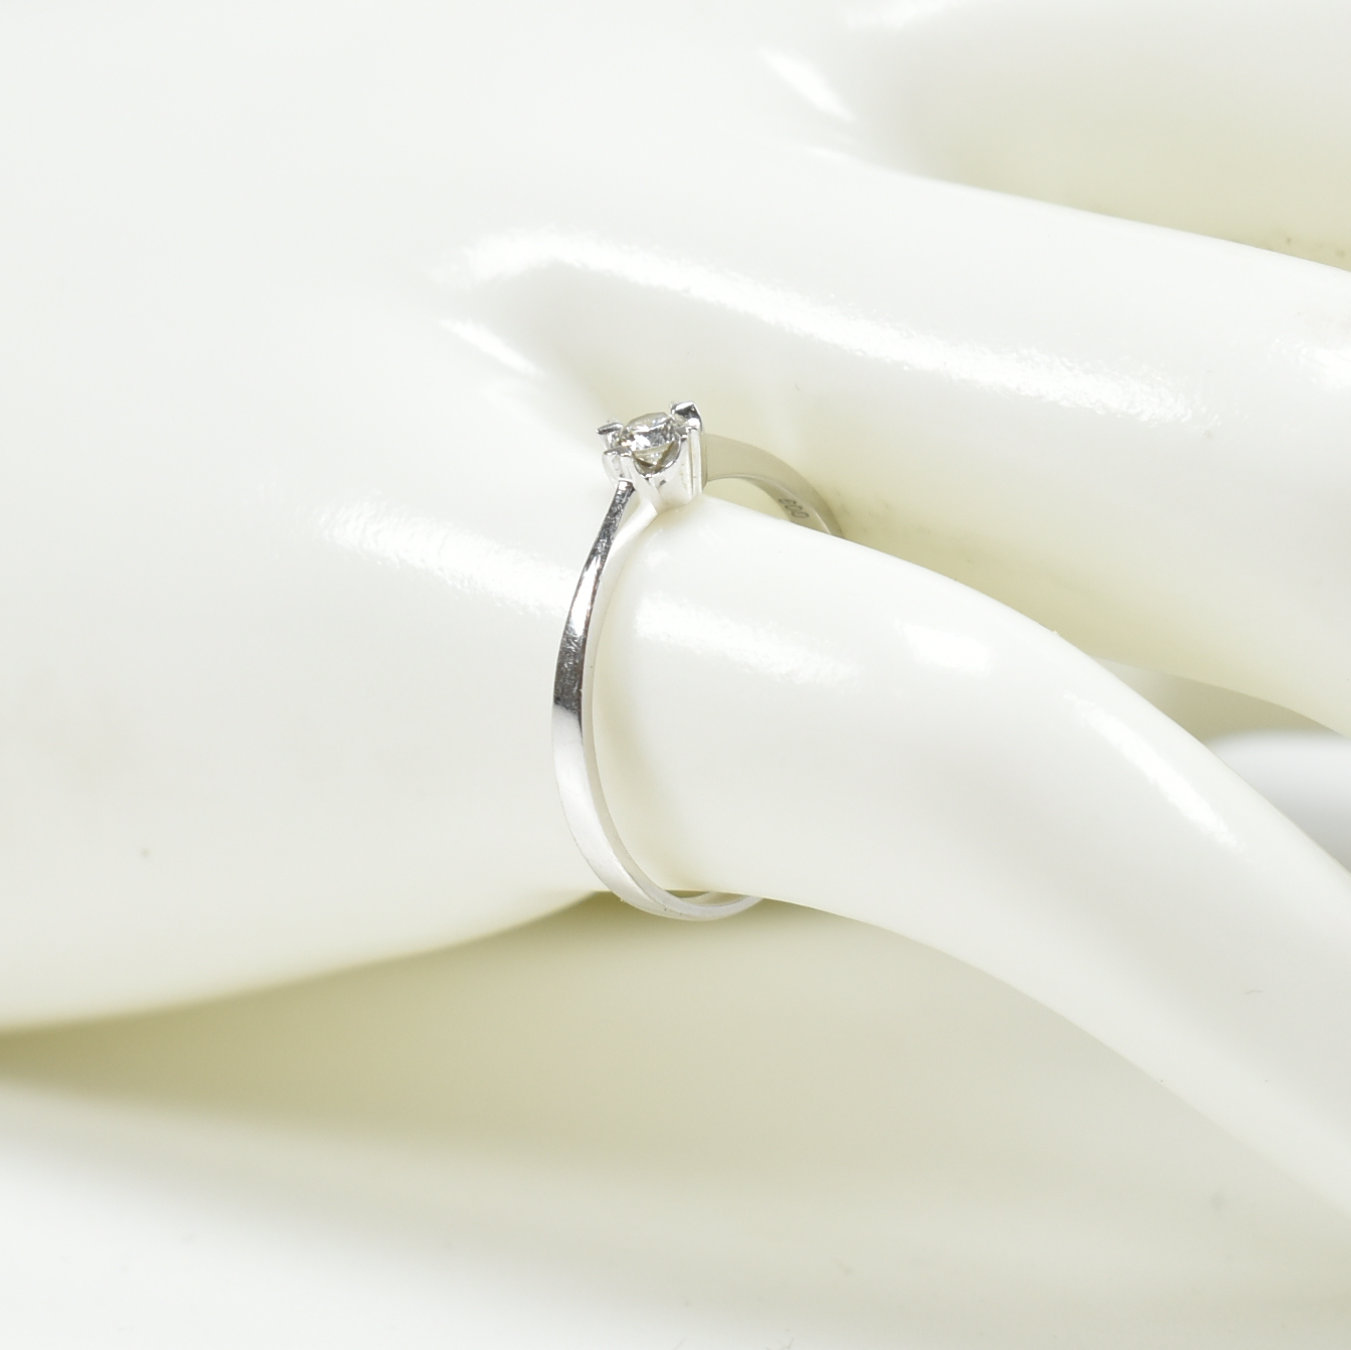 TWO 18CT WHITE GOLD & DIAMOND SOLITAIRE RINGS - Image 11 of 14